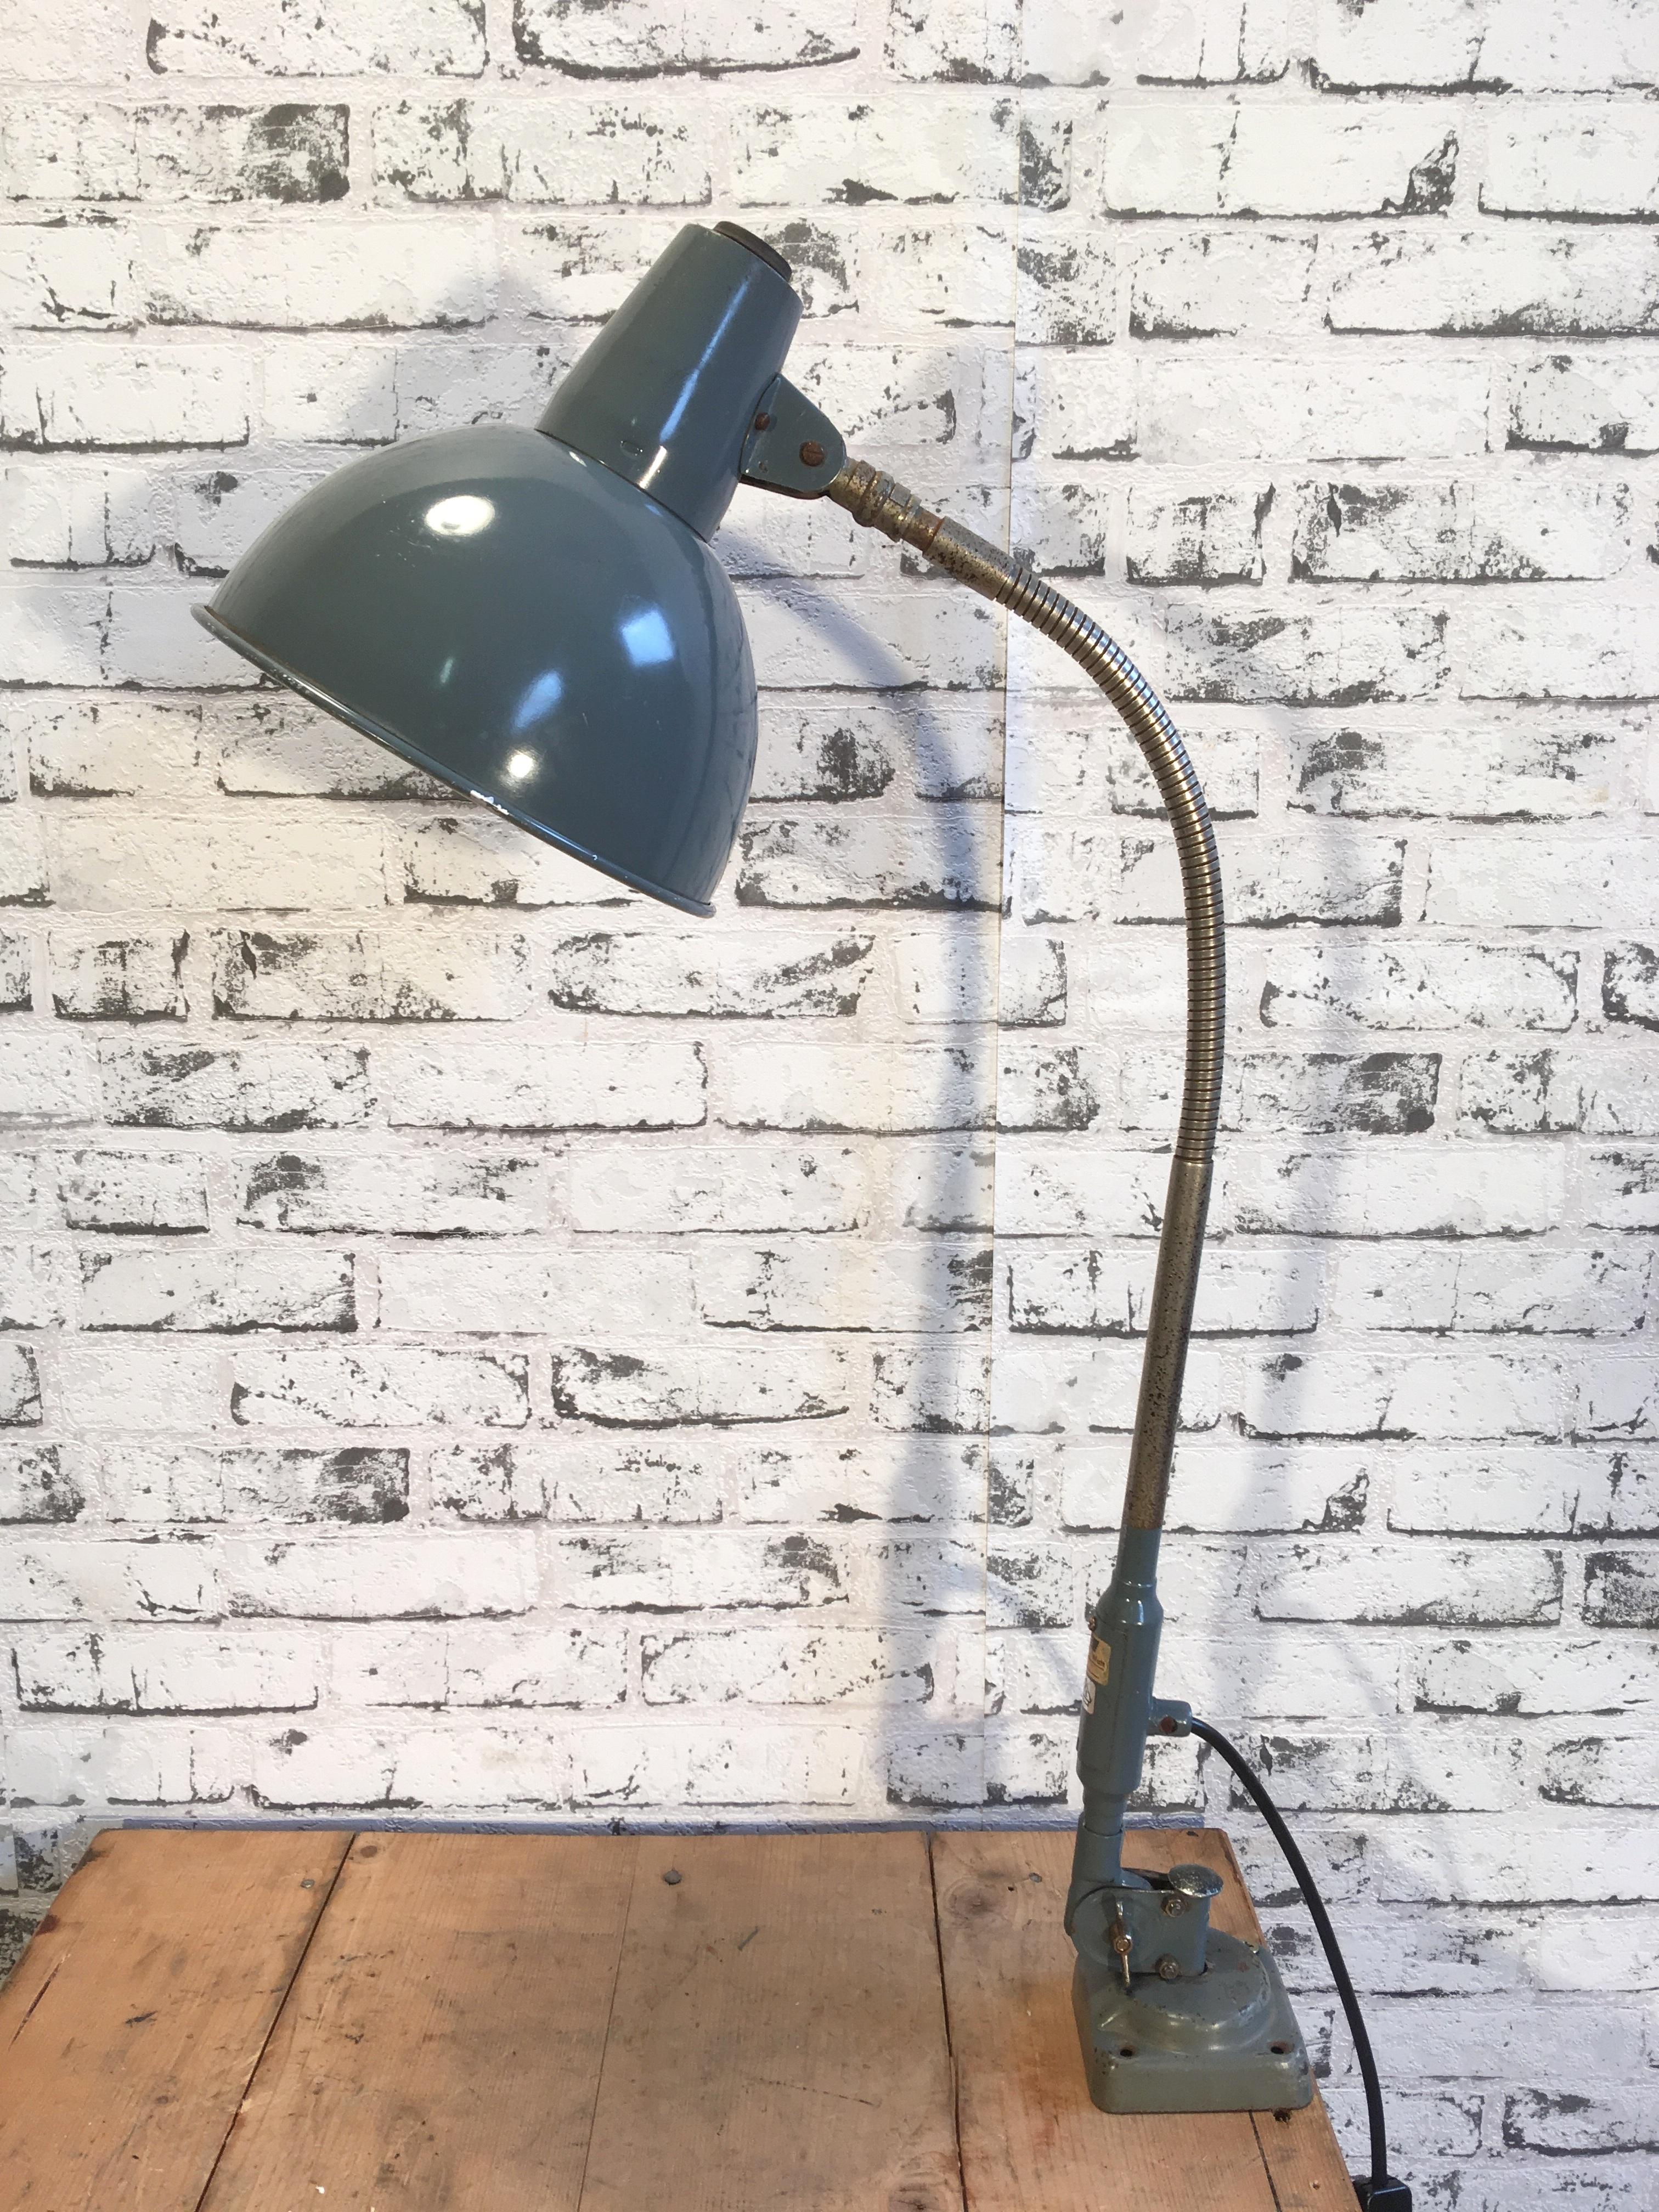 This Industrial adjustable table lamp was made by SIS (Sirius Schweinfurt, Gebr. Lang & Co. Germany) in Germany during the 1950s.It features grey aluminium shade, iron base and chrome-plated gooseneck. Socket for E 27 bulbs, new wire. Good vintage